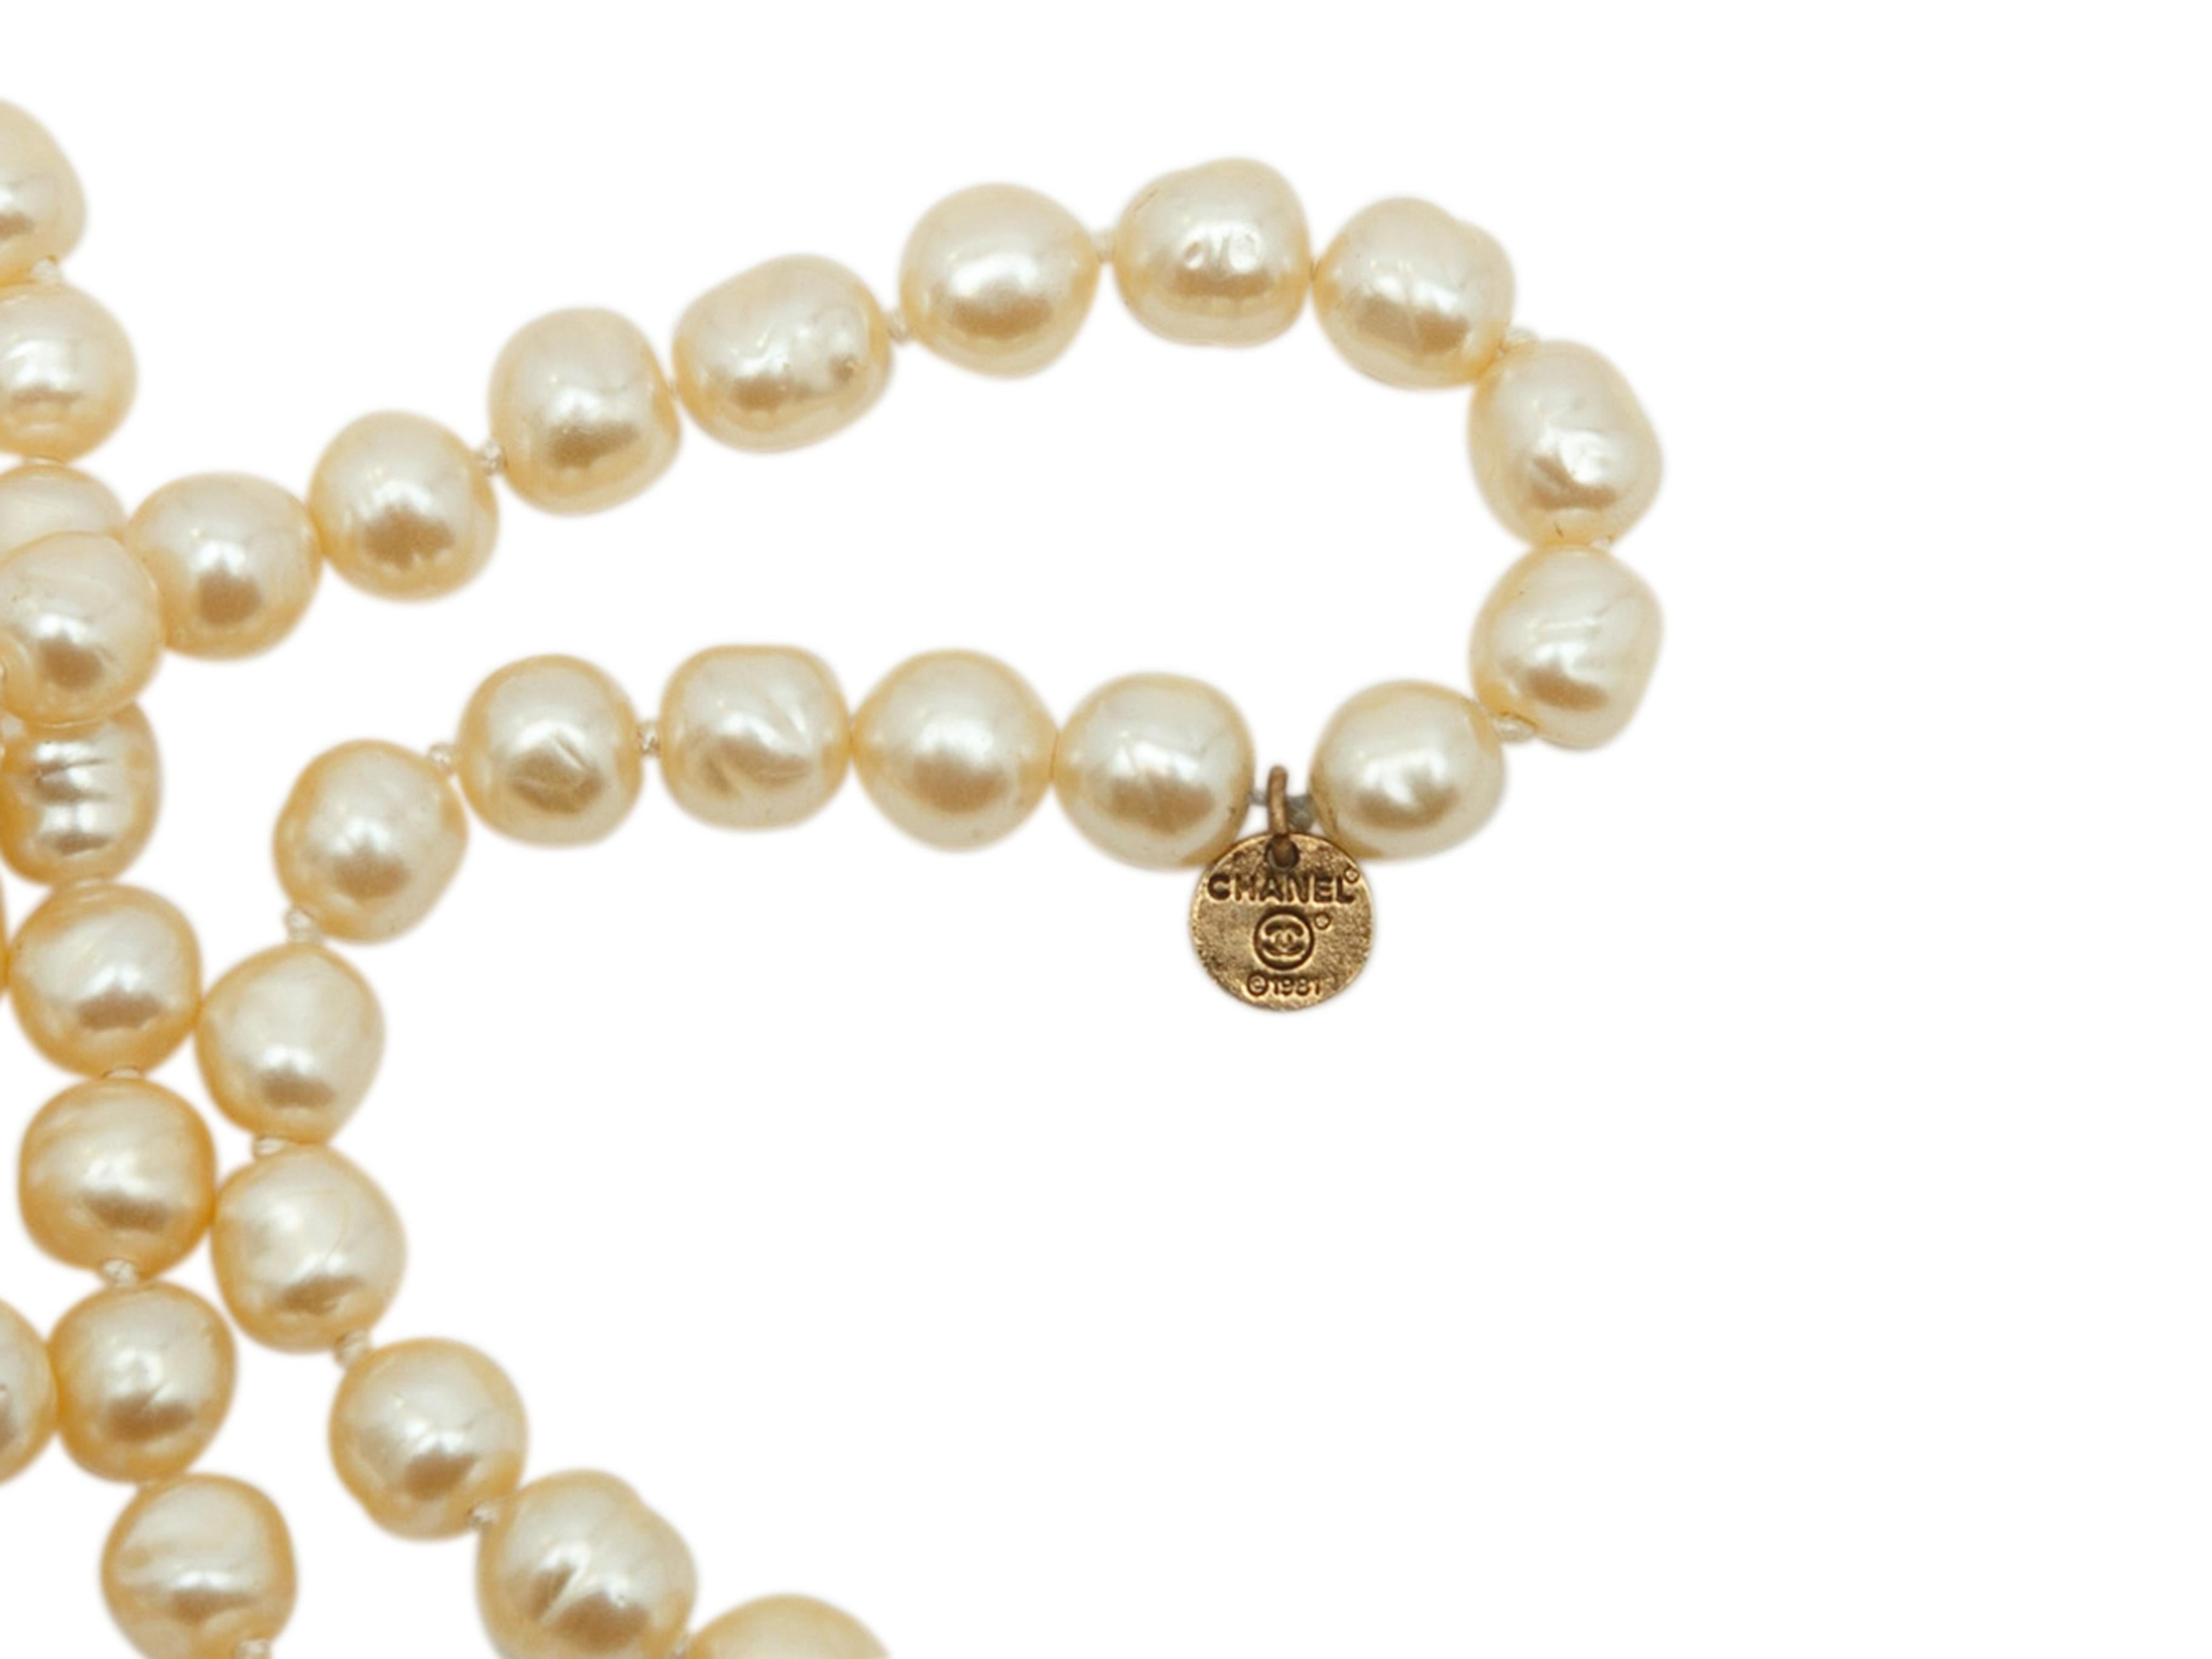 Product details: Vintage 1981 pearl necklace by Chanel. No clasp. 30